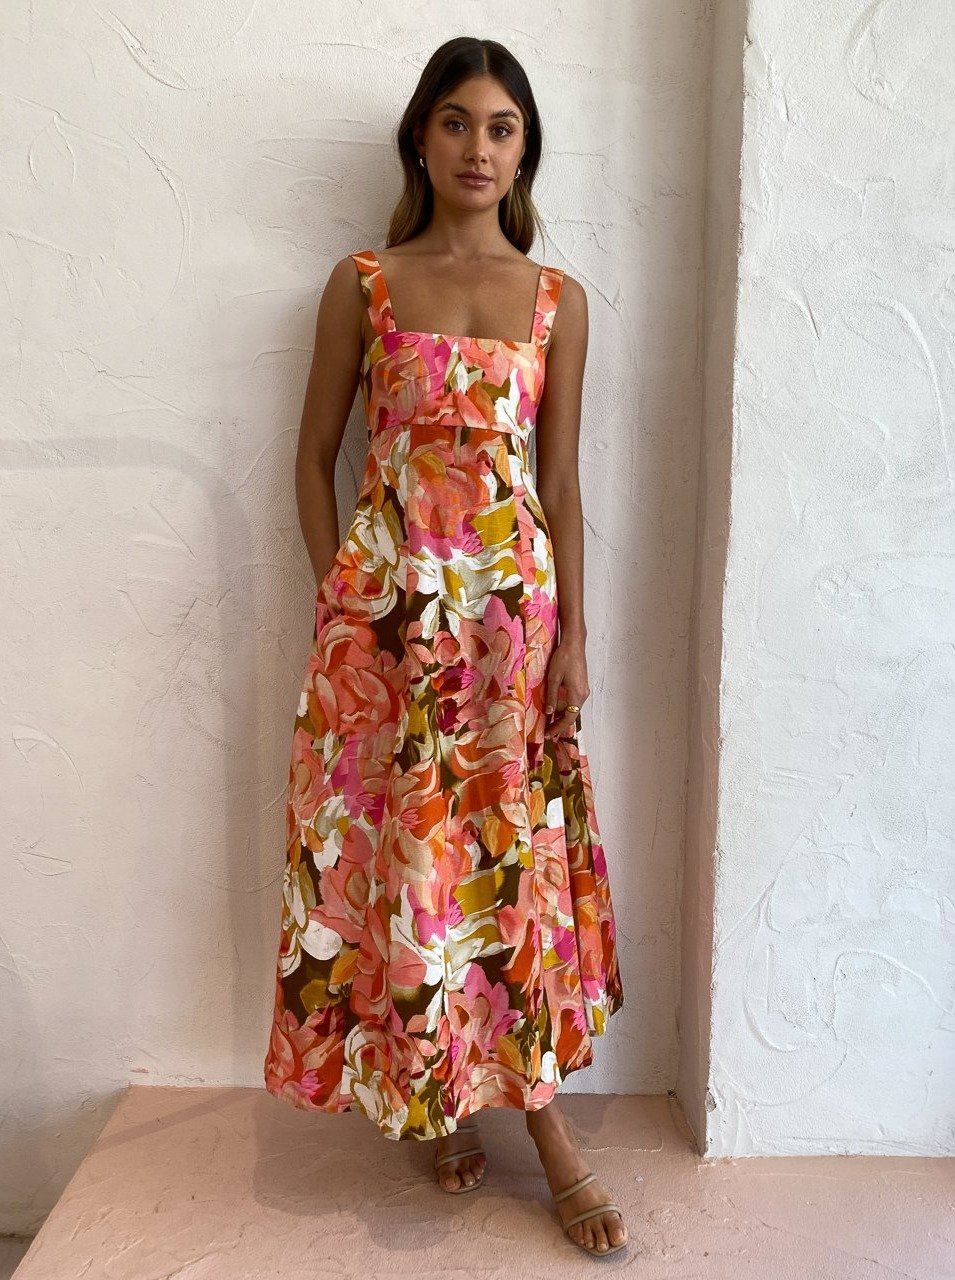 Acler Tate Dress - Pink Bouquet - Get Dressed Hire